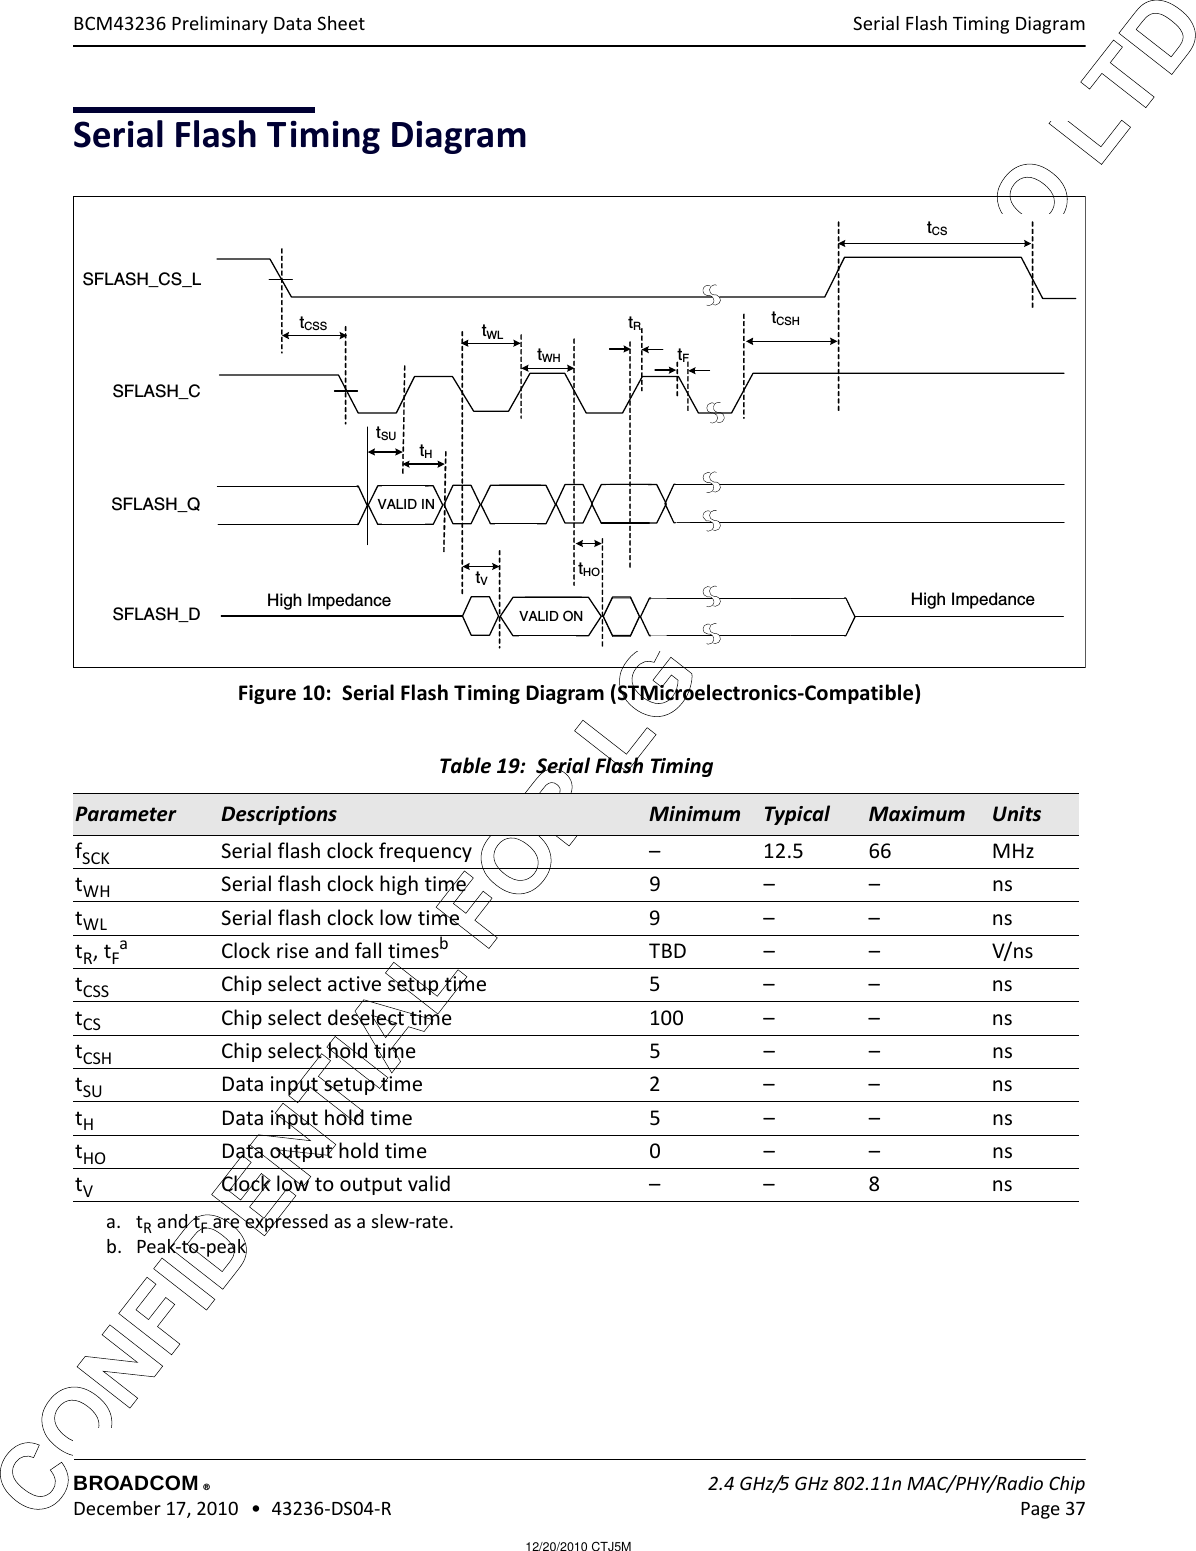 12/20/2010 CTJ5MCONFIDENTIAL FOR LG INNOTEK CO LTD Serial Flash Timing DiagramBROADCOM    2.4 GHz/5 GHz 802.11n MAC/PHY/Radio Chip December 17, 2010   •  43236-DS04-R Page 37®BCM43236 Preliminary Data SheetSerial Flash Timing DiagramFigure 10:  Serial Flash Timing Diagram (STMicroelectronics-Compatible)Table 19:  Serial Flash Timing Parameter Descriptions Minimum Typical Maximum UnitsfSCK Serial flash clock frequency – 12.5 66 MHztWH Serial flash clock high time 9 – – nstWL Serial flash clock low time 9 – – nstR, tFaa. tR and tF are expressed as a slew-rate.Clock rise and fall timesbb. Peak-to-peakTBD – – V/nstCSS Chip select active setup time 5 – – nstCS Chip select deselect time 100 – – nstCSH Chip select hold time 5 – – nstSU Data input setup time 2 – – nstHData input hold time 5 – – nstHO Data output hold time 0 – – nstVClock low to output valid – – 8 nsSFLASH_CS_LSFLASH_CSFLASH_QSFLASH_D High Impedance High ImpedancetCSS tWLtWHtCSHtCStFtHOtVtHtSUVALID ONVALID INtR